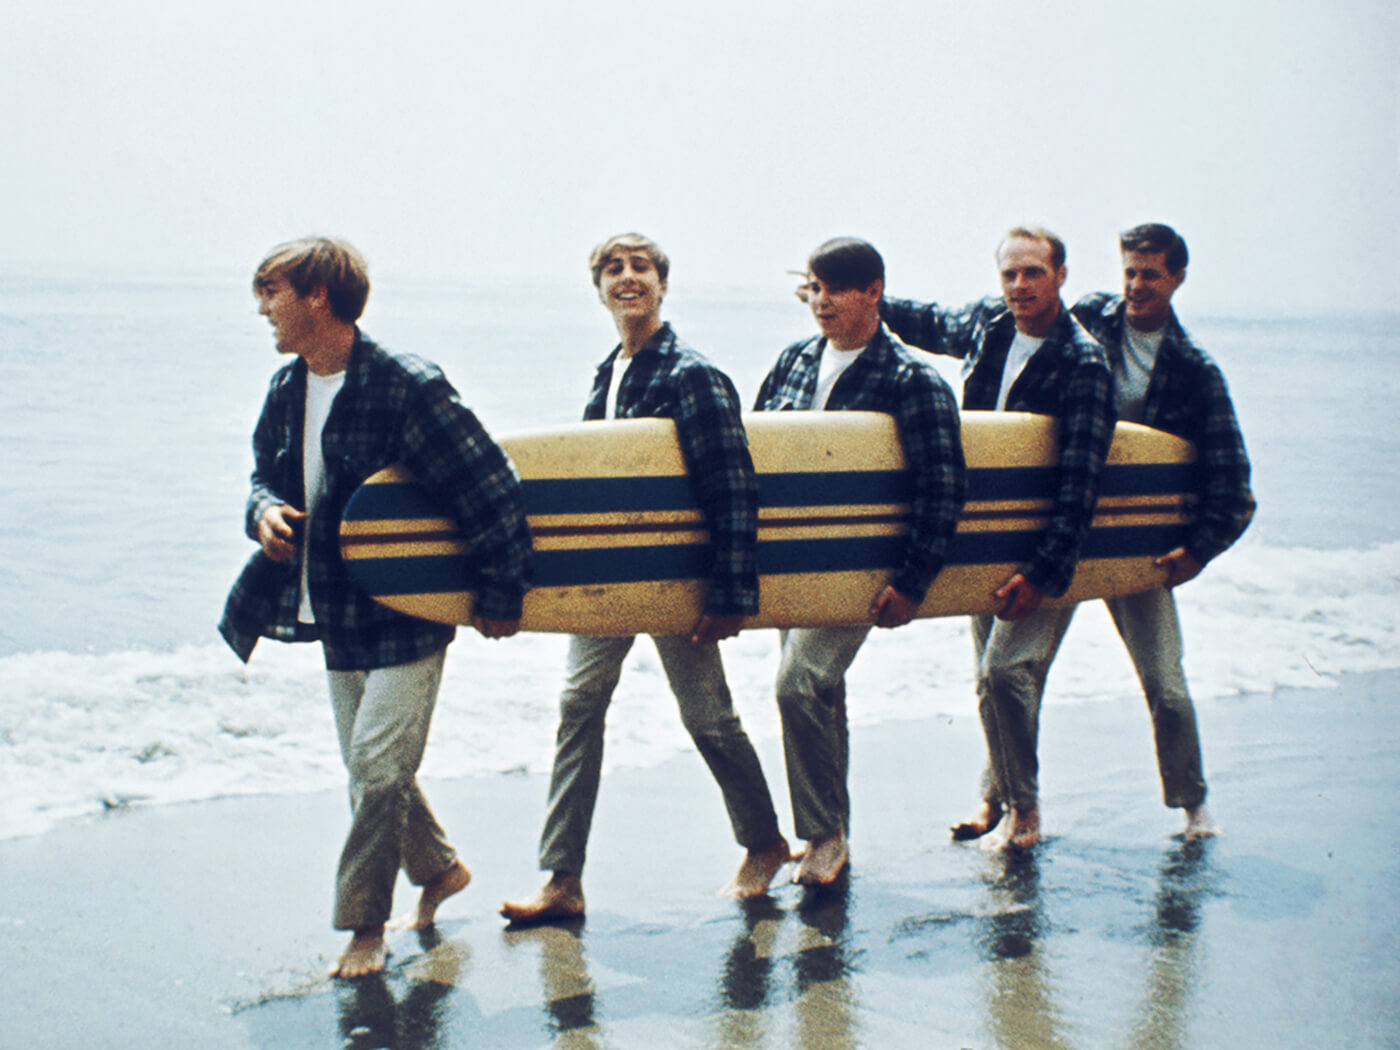 The Beach Boys on a beach holding a surfboard. Left to right: Dennis Wilson, David Marks, Mike Love, Carl Wilson, Brian Wilson. Photo by Michael Ochs Archives/Getty Images